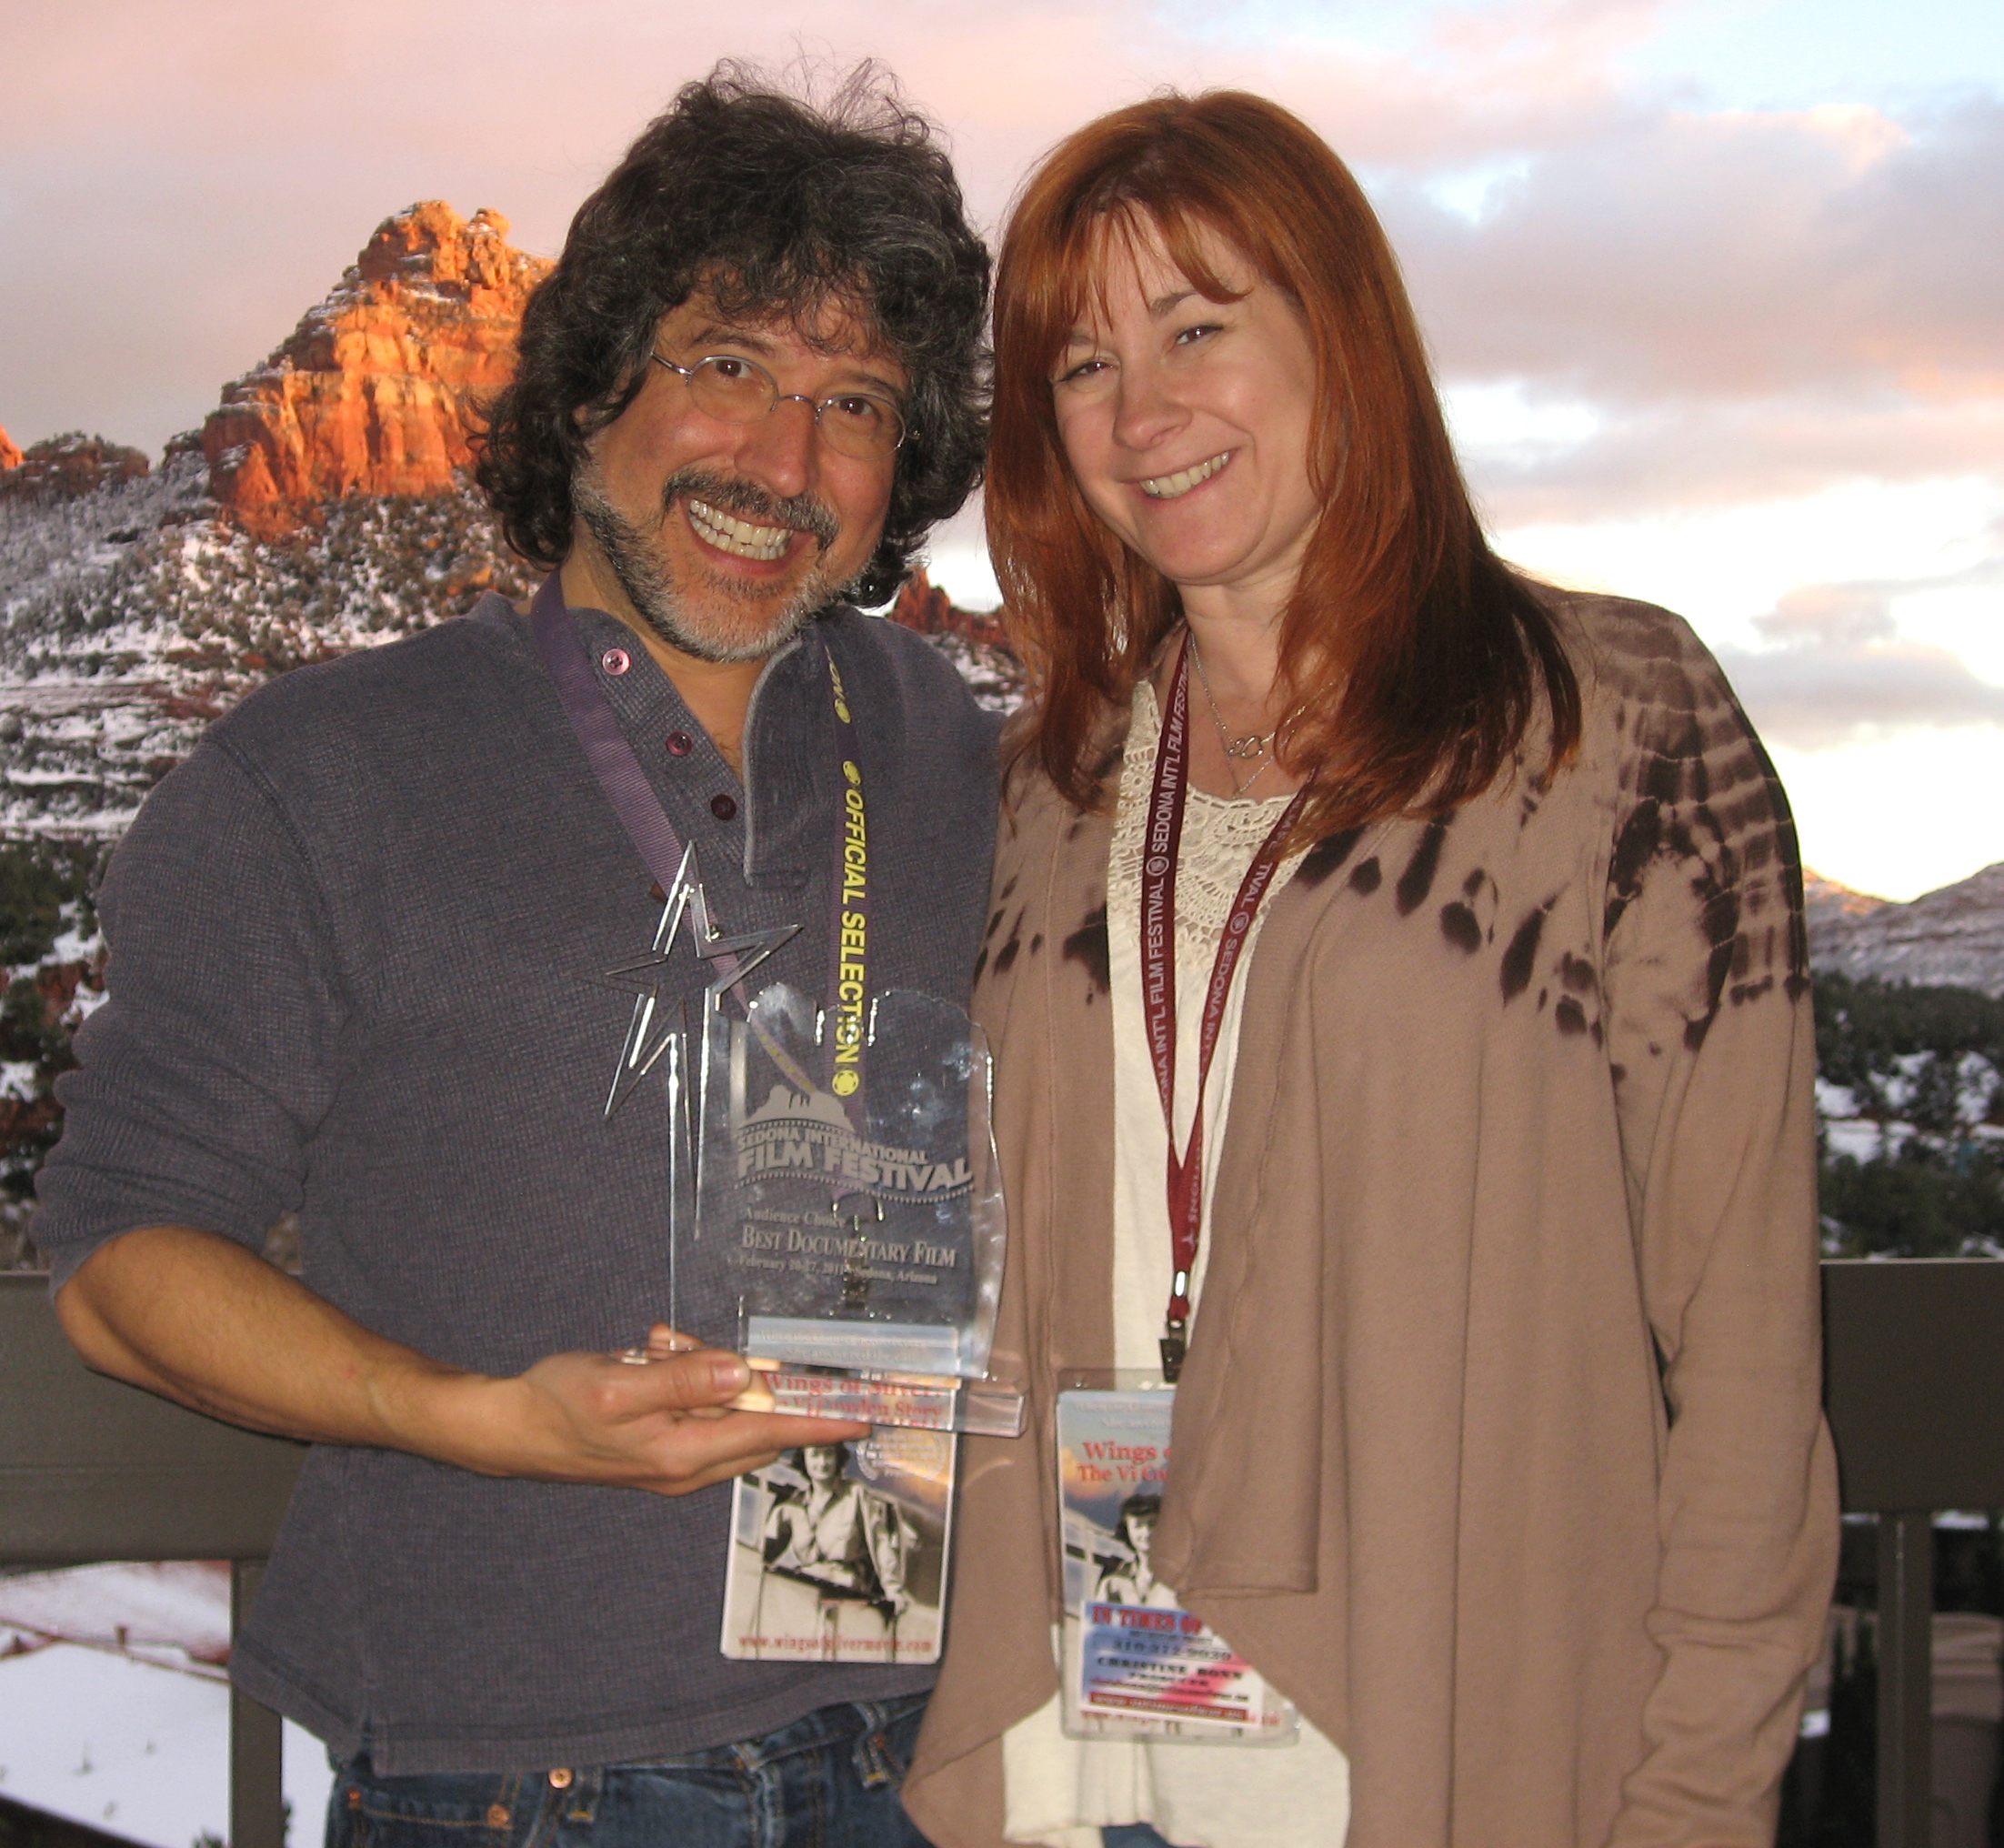 Honored to have won the Audience Award for Best Documentary Short (Wings of Silver: The Vi Cowden Story) at the 2011 Sedona International Film Festival!